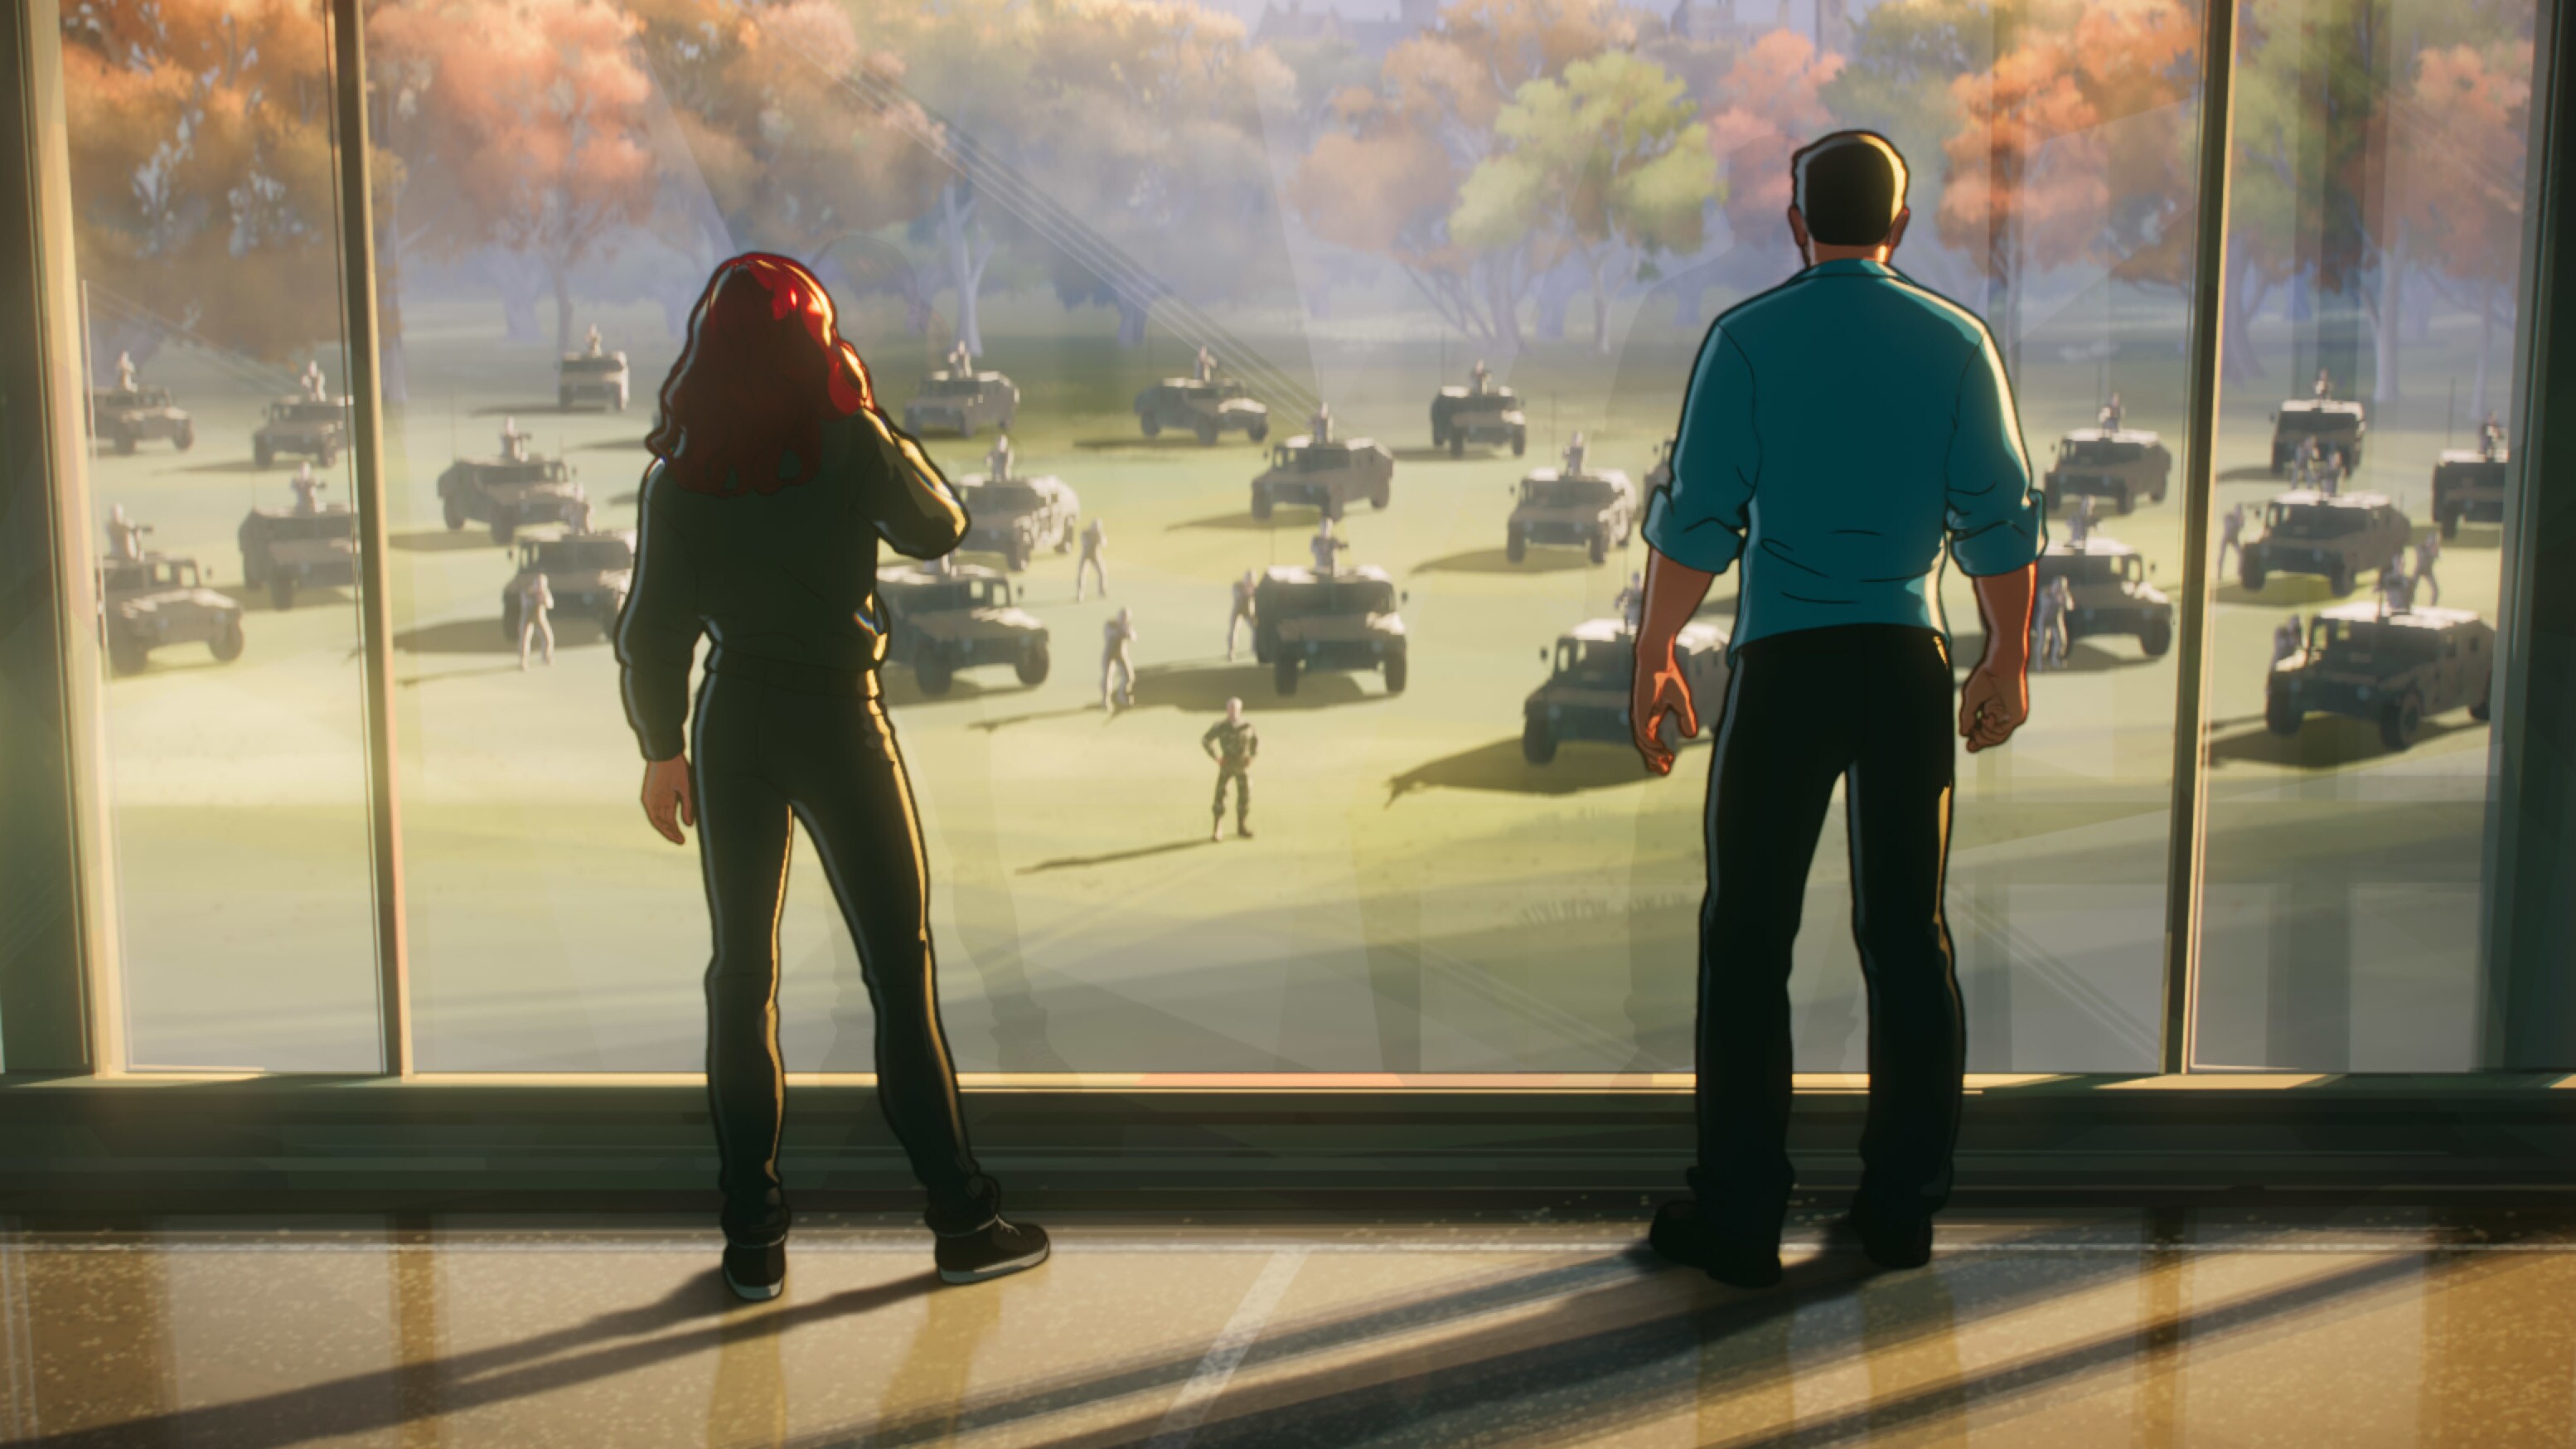 (L-R): Black Widow/Natasha Romanoff and Hulk/Bruce Banner in Marvel Studios' WHAT IF…? exclusively on Disney+. ©Marvel Studios 2021. All Rights Reserved.